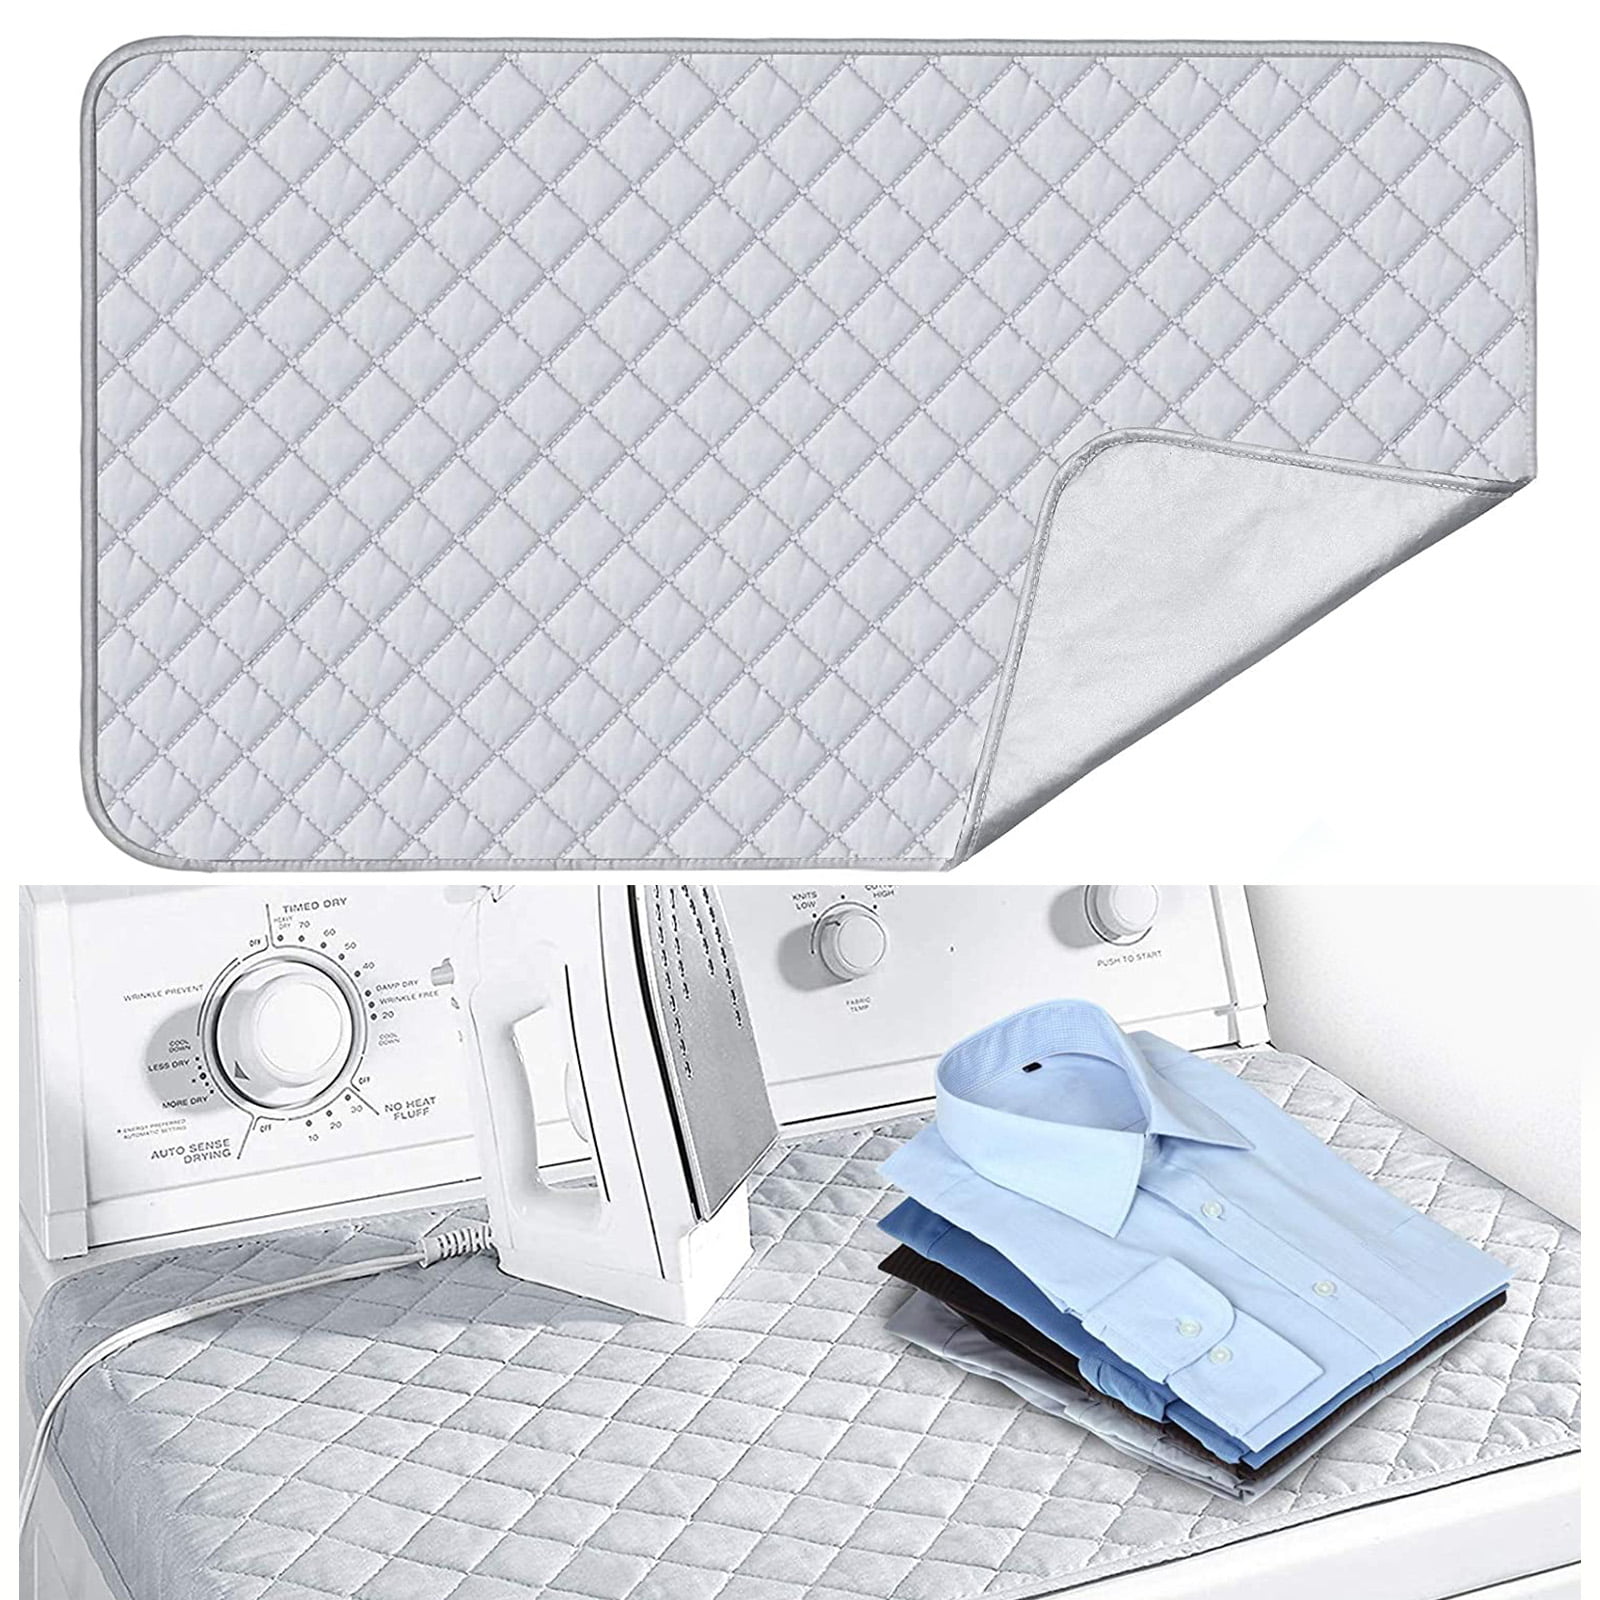 1* Portable Magnetic Mat Washer Ironing Cover Dryer Heat Board Resistant Bl C1X8 